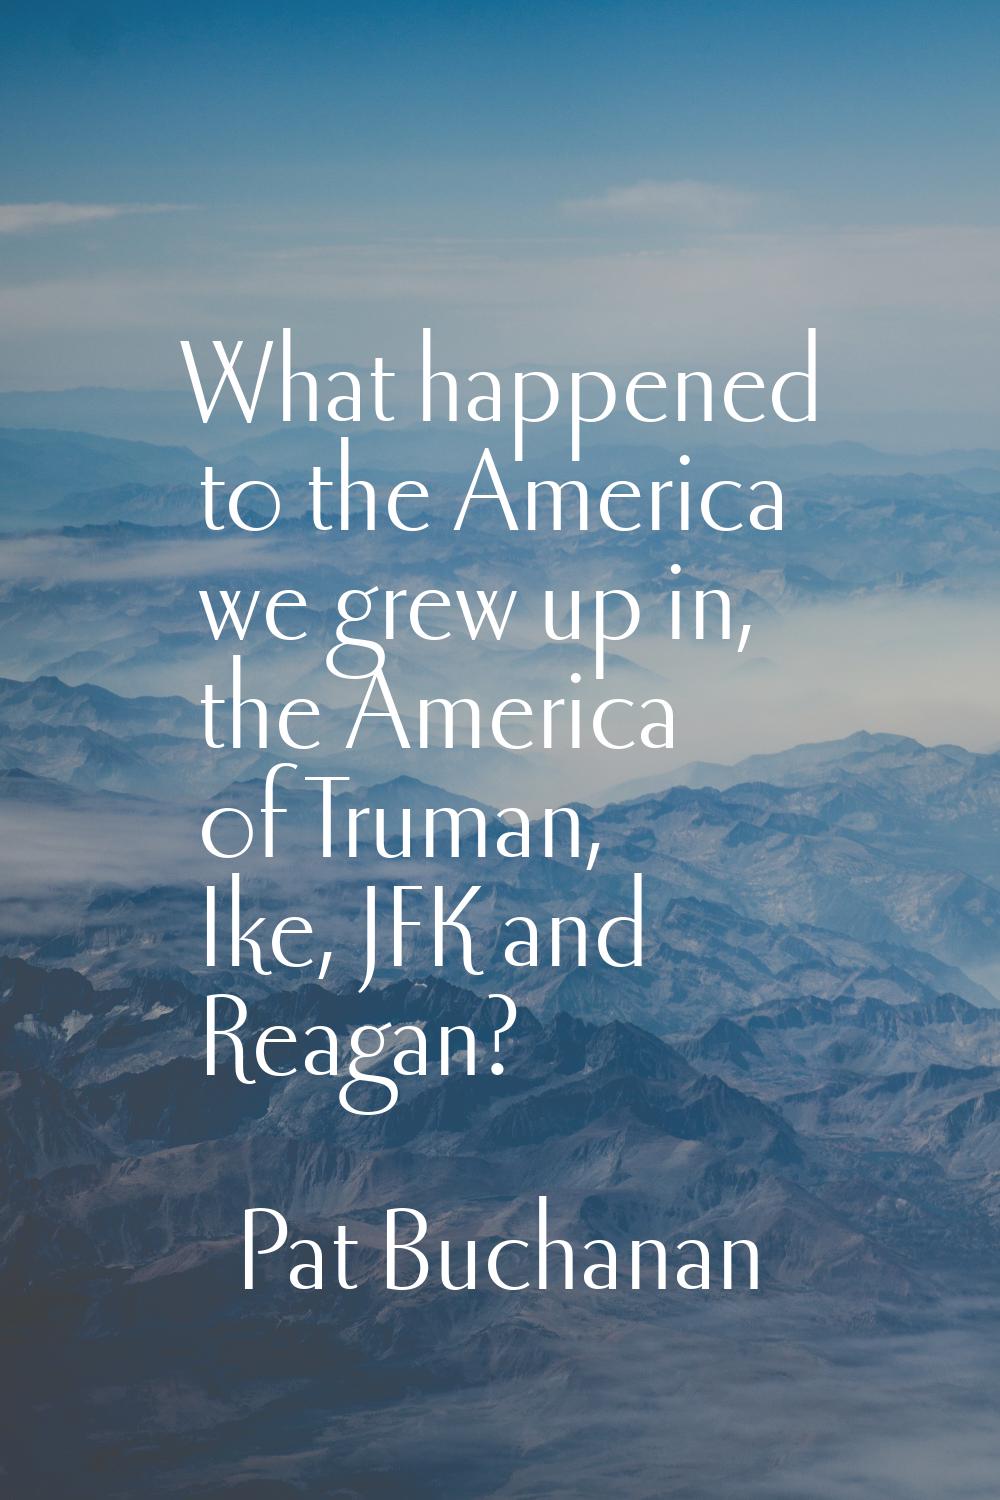 What happened to the America we grew up in, the America of Truman, Ike, JFK and Reagan?